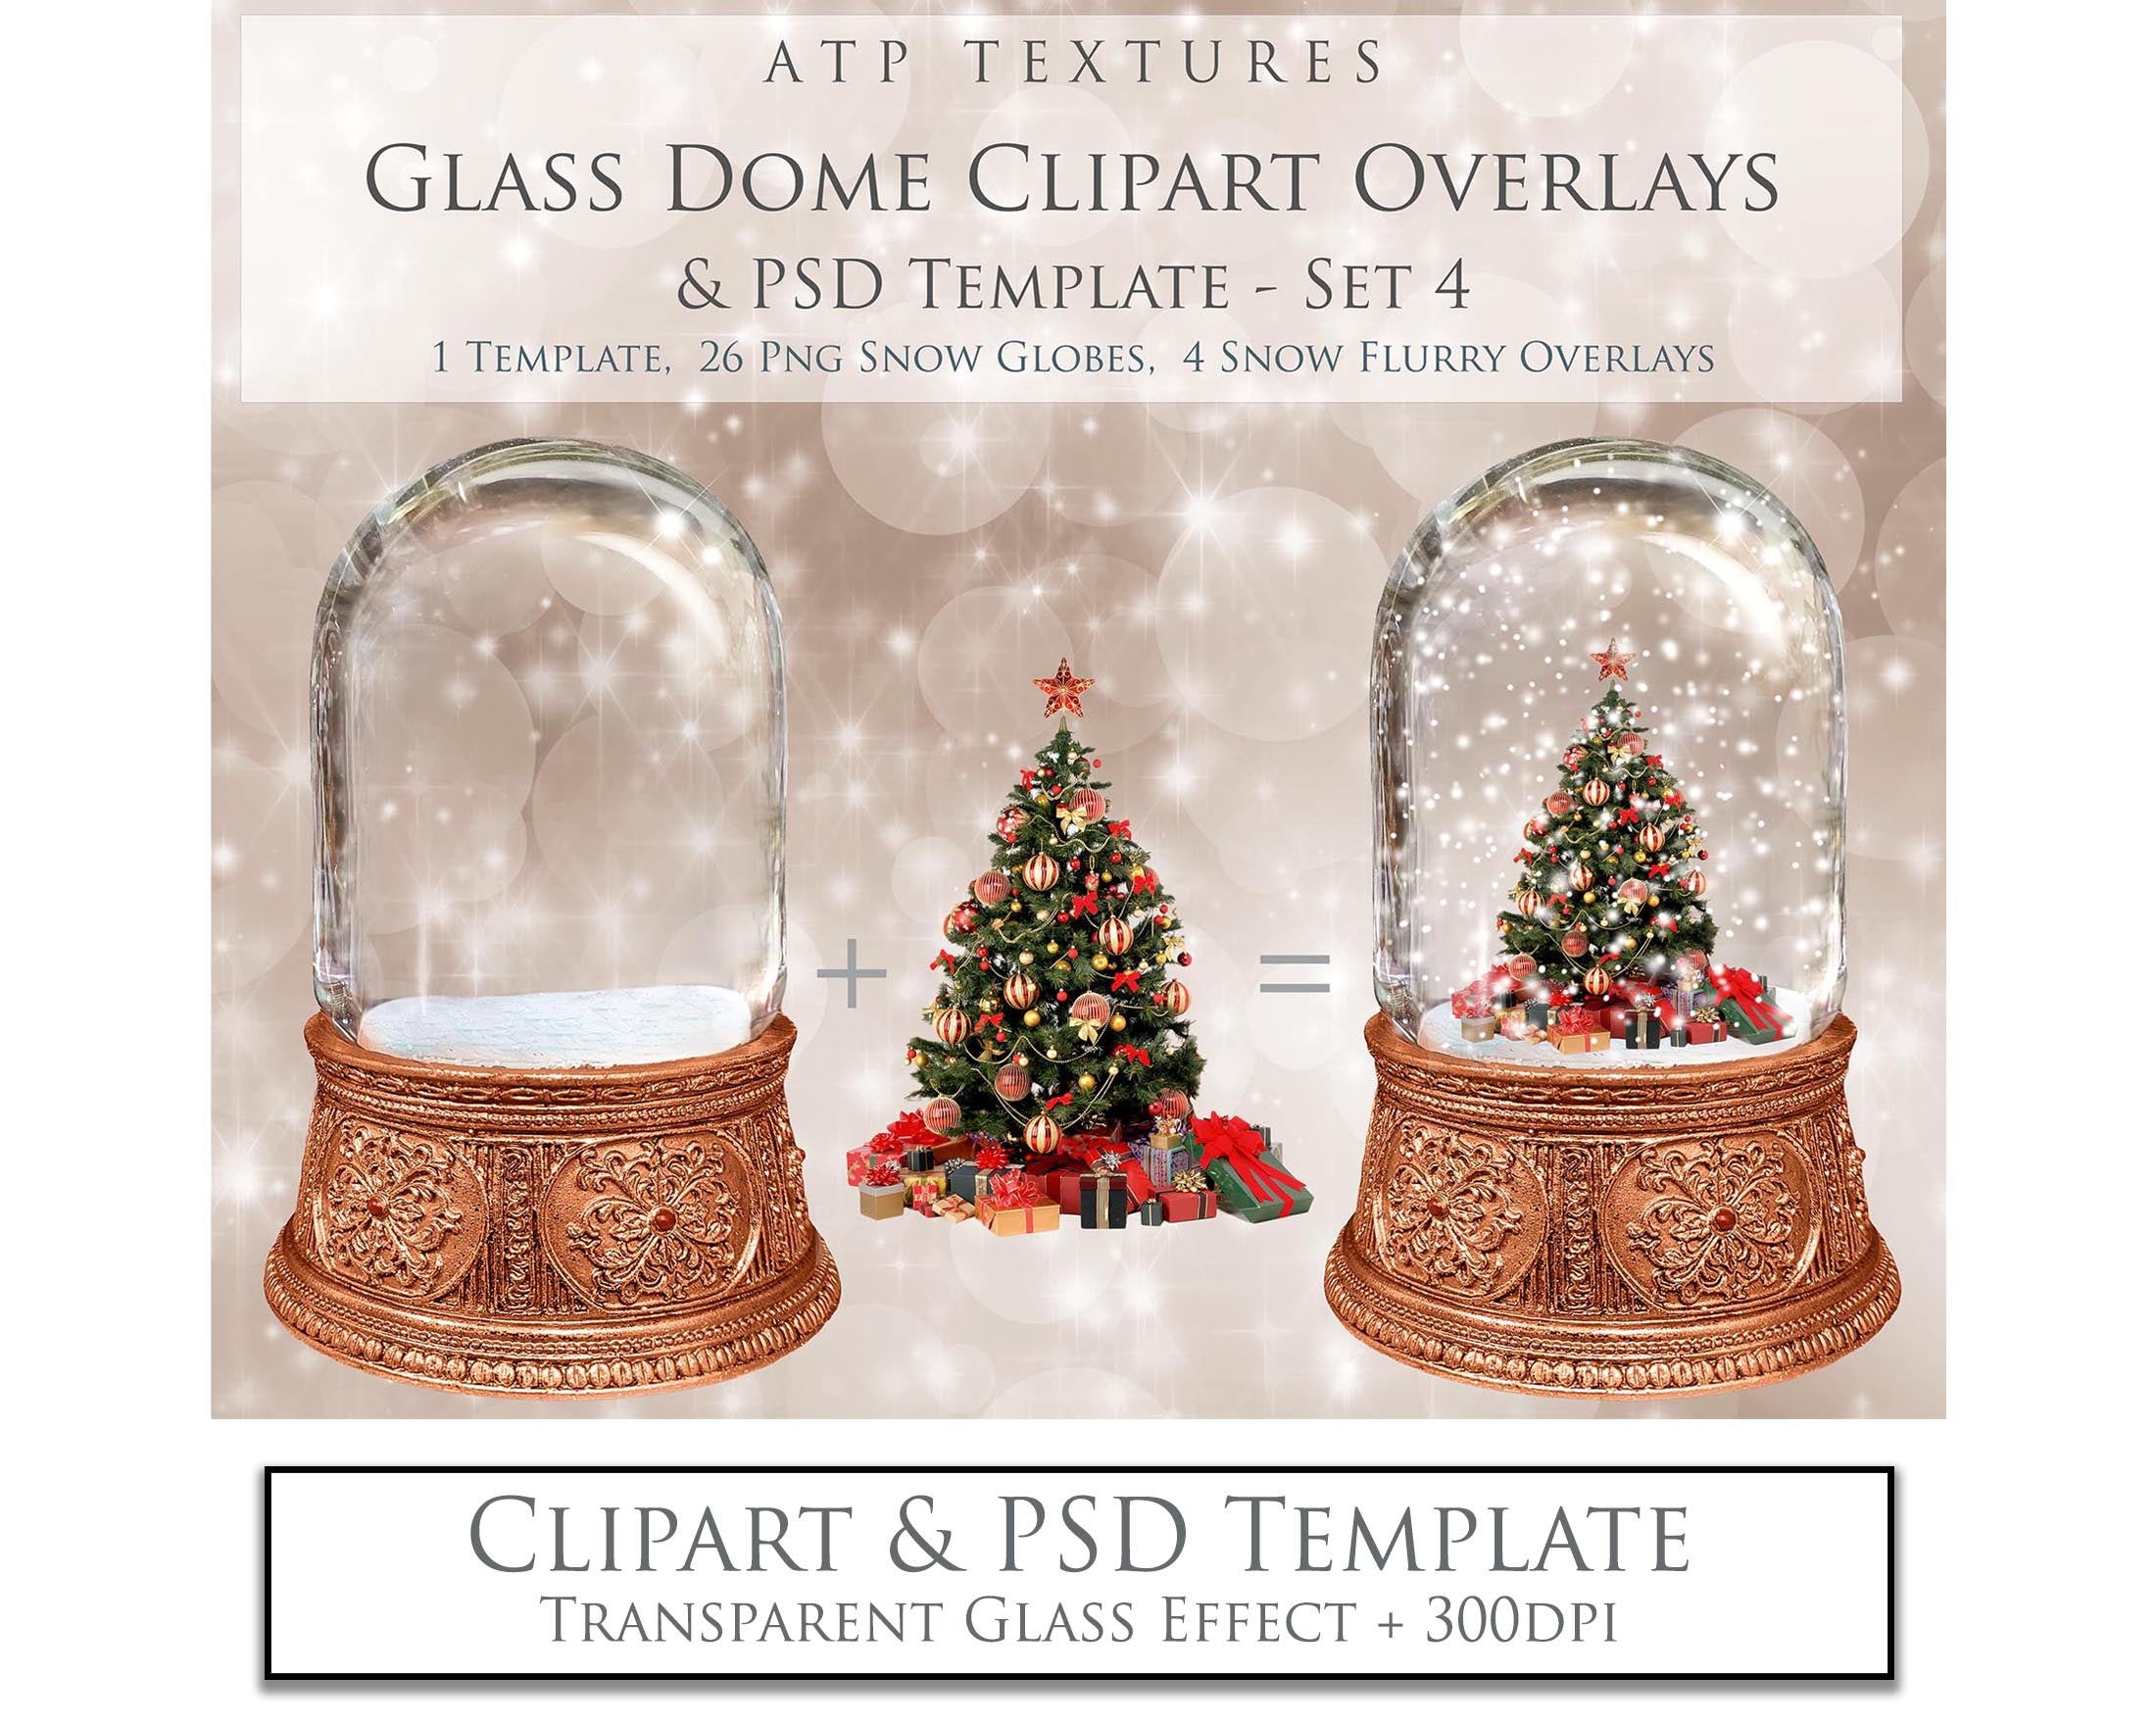 Clear Transparent Digital Glass Dome Overlays. Png clipart overlays with PSD photoshop template for photographers. Digital overlays for photography editing. Realistic Photo Graphic Effects and assets. lighting Add ons. ATP Textures.